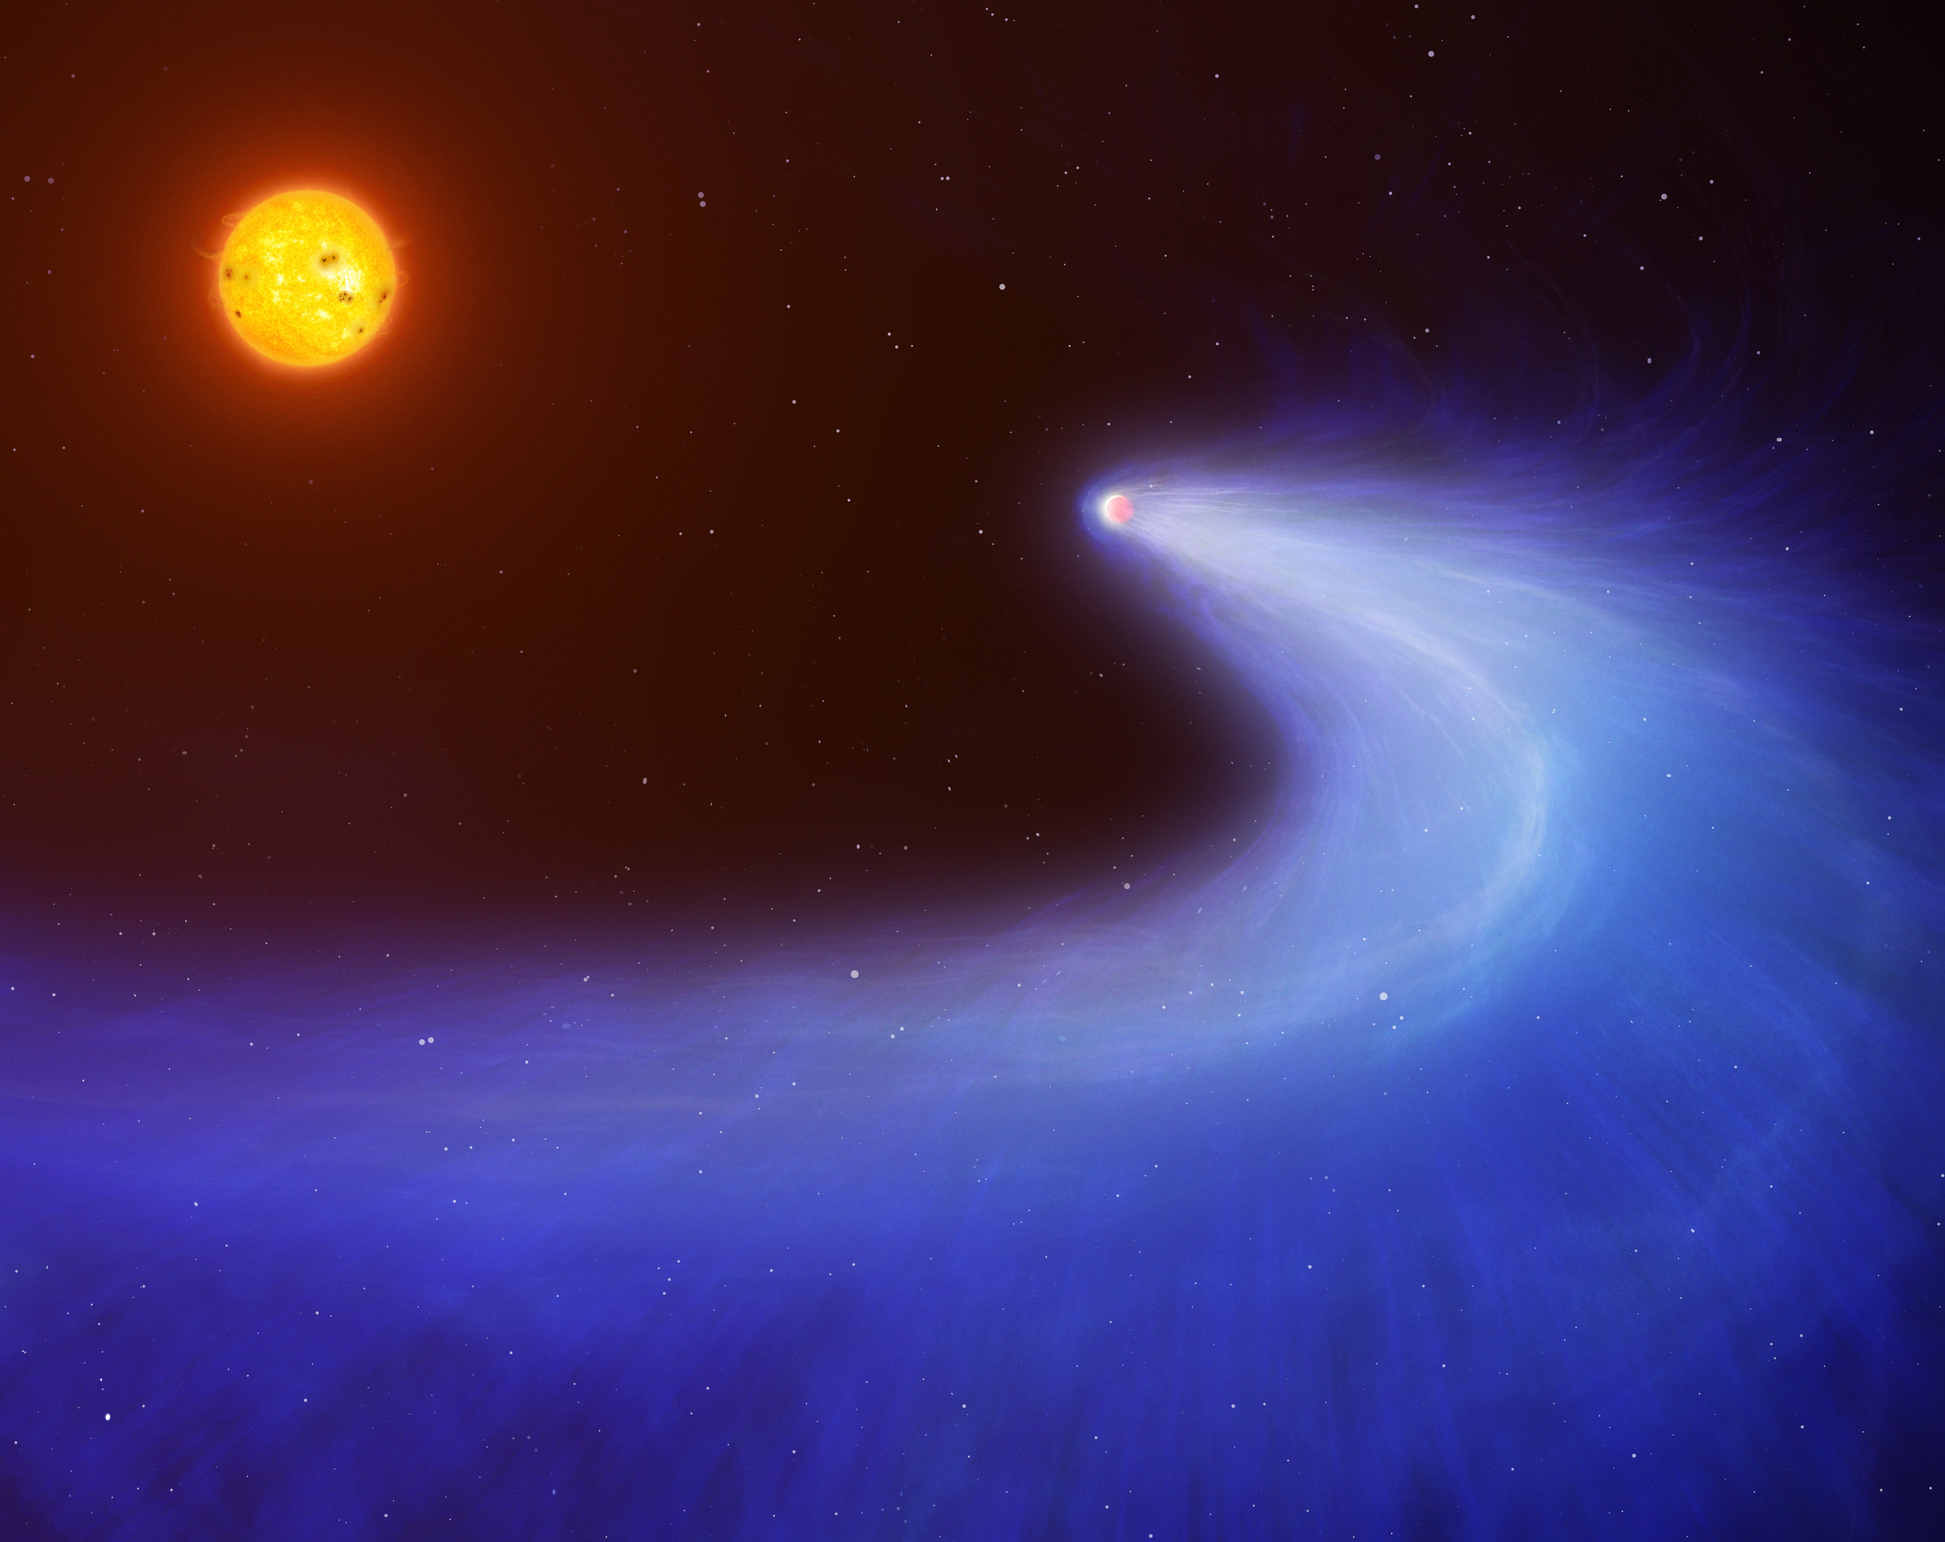 An illustration of ultraviolet light from a red dwarf (top left) as it slowly evaporates from an exoplanet's atmosphere.